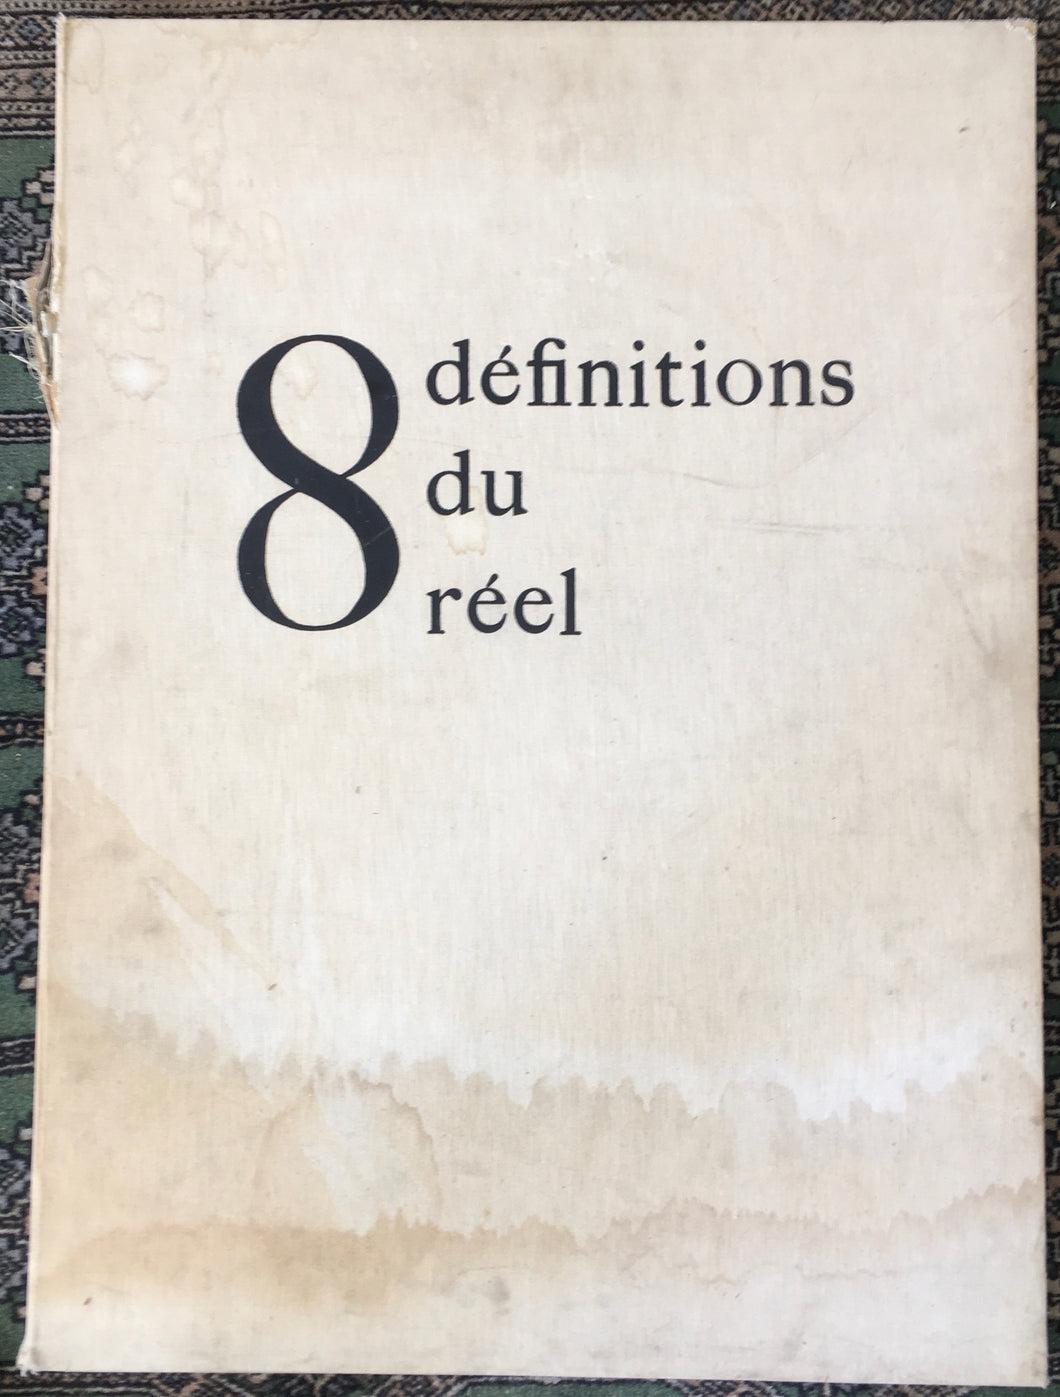 1974 French artists portfolio - 8 definitions du reel [8 definitions of reality]